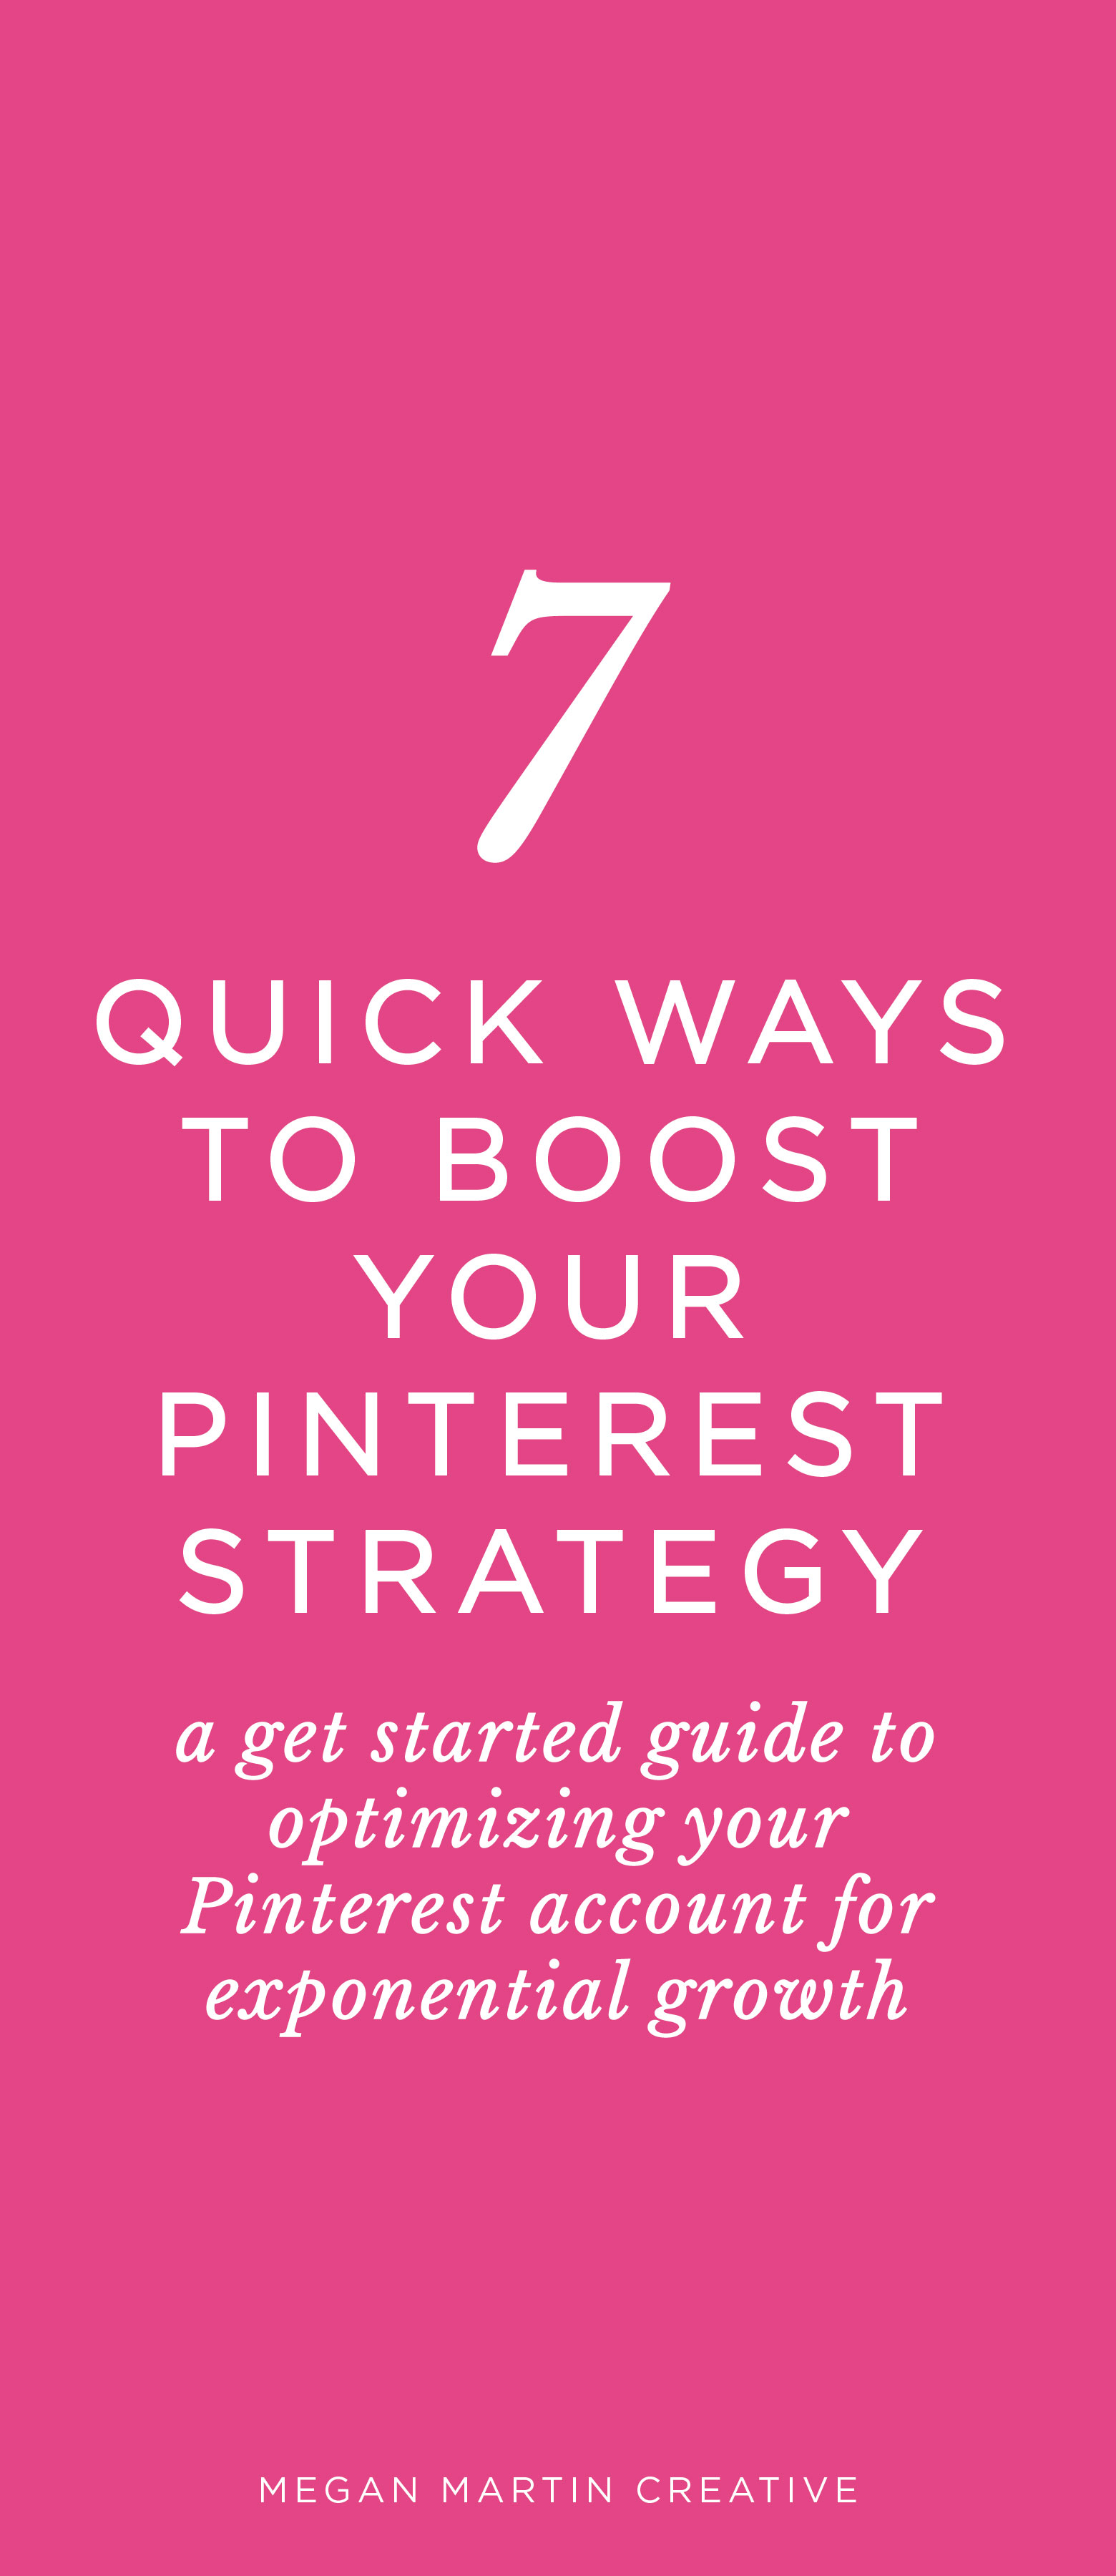 7 quick ways to boost your Pinterest Strategy to gain blog and website traffic, increase exposure to your brand, and target your ideal clients and customers on Megan Martin Creative, pinterest tips, social media marketing, pin graphics, how to grow your pinterest account, rich pins